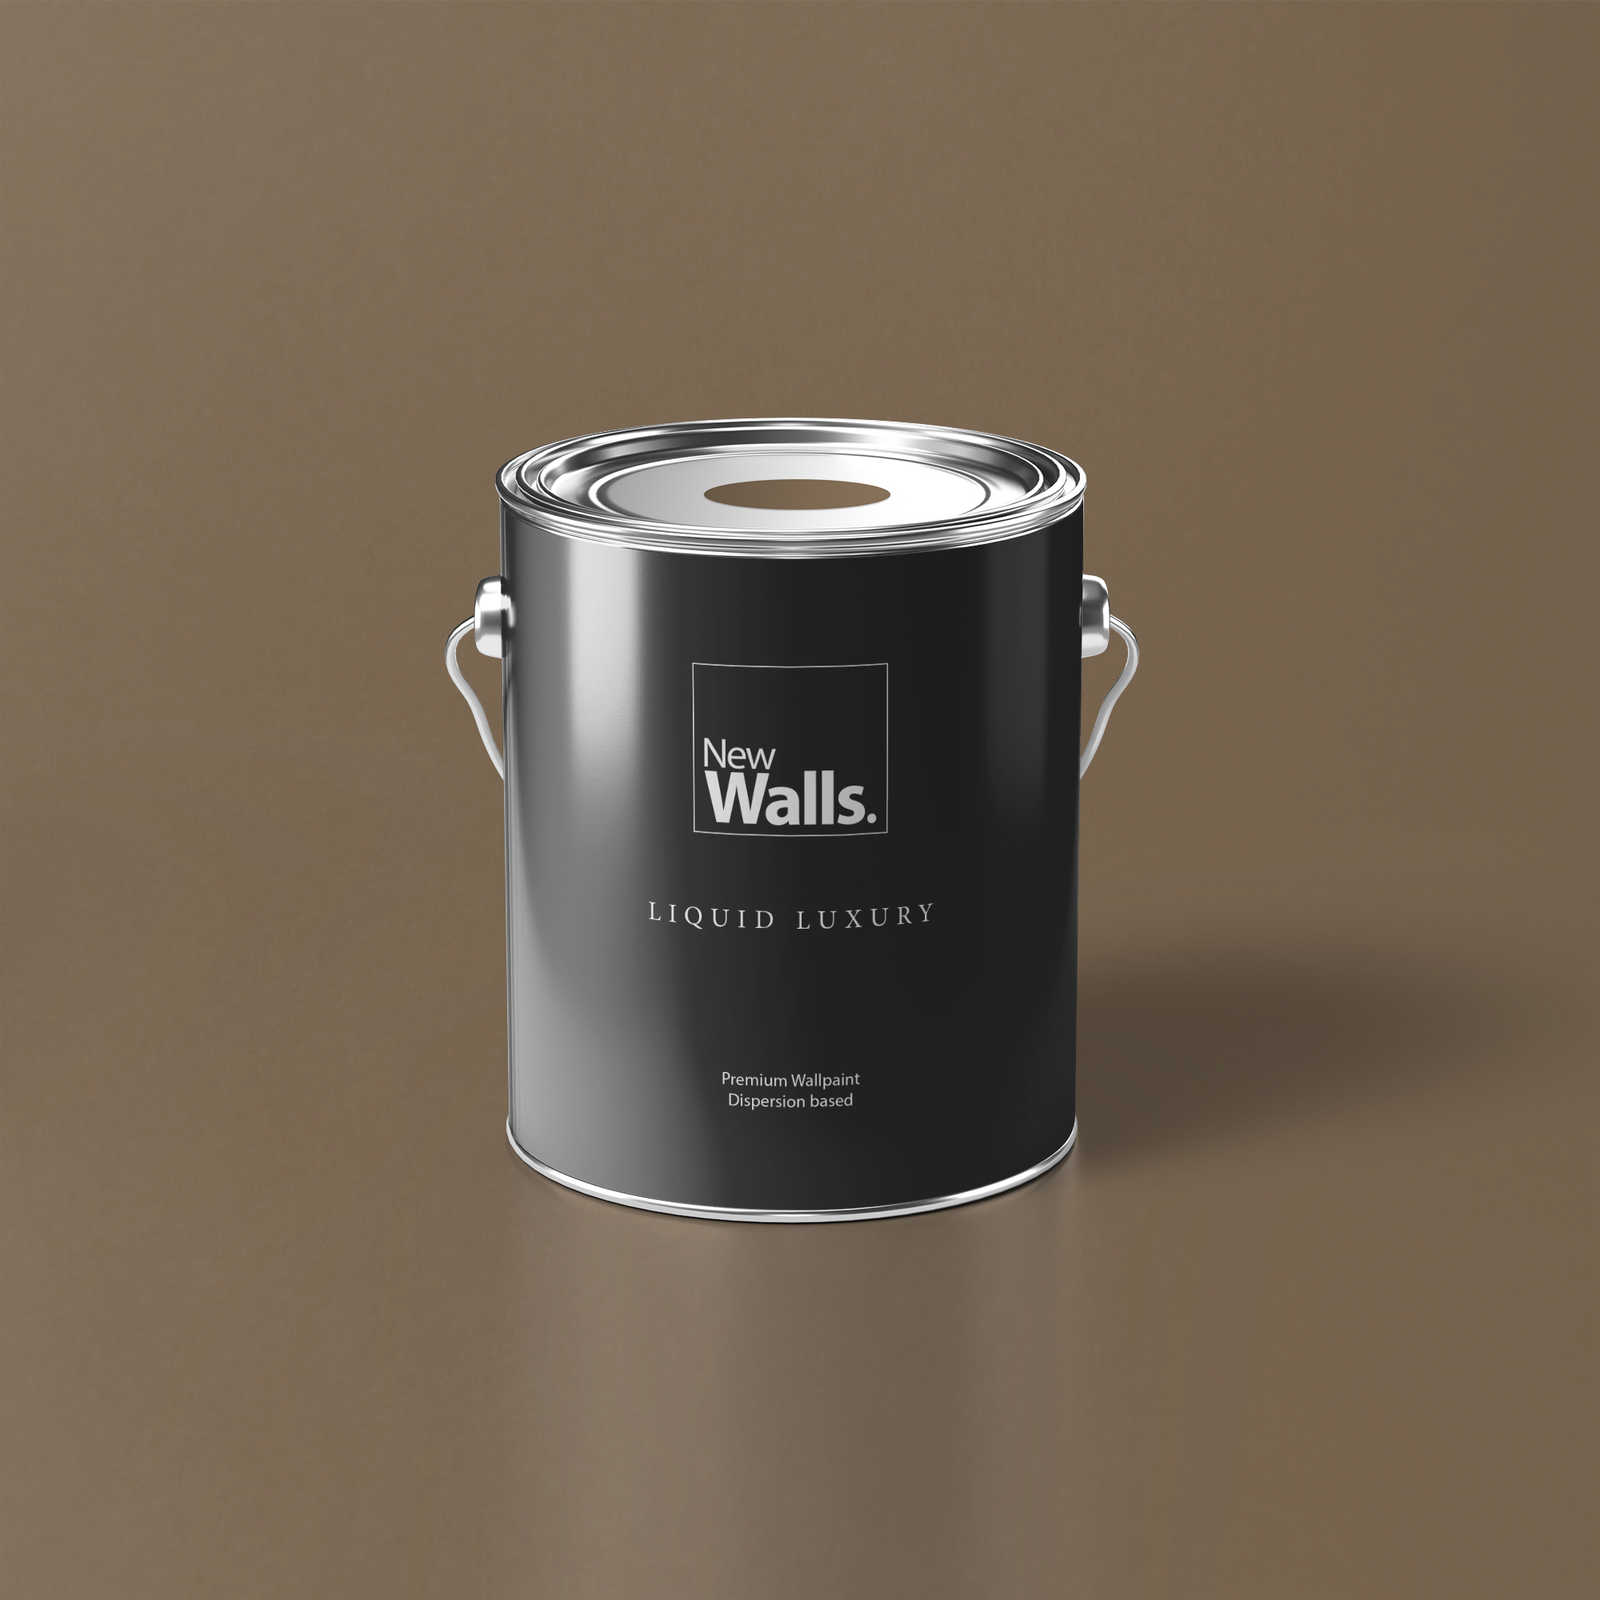 Premium Wall Paint Soothing Brown »Essential Earth« NW711 – 5 litre
